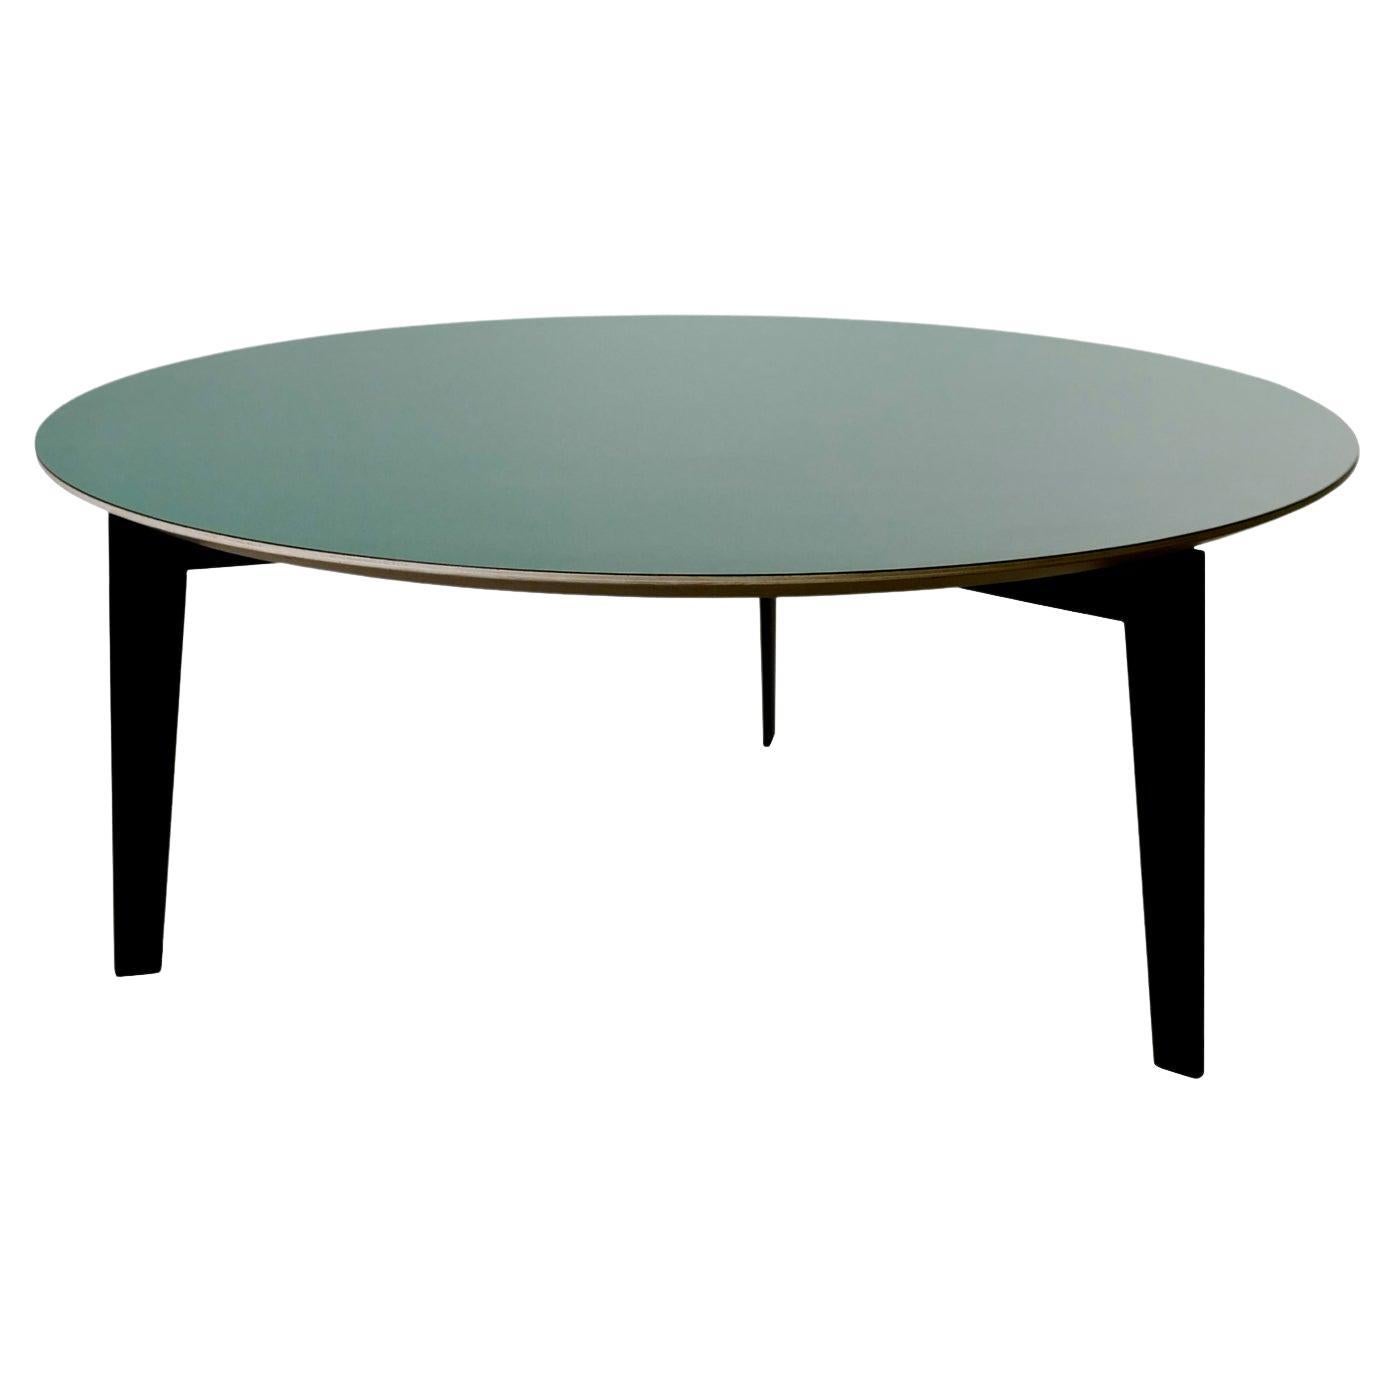 Italian Contemporary Steel and Plywood Center Table, "Armabianca 04" by Errante For Sale